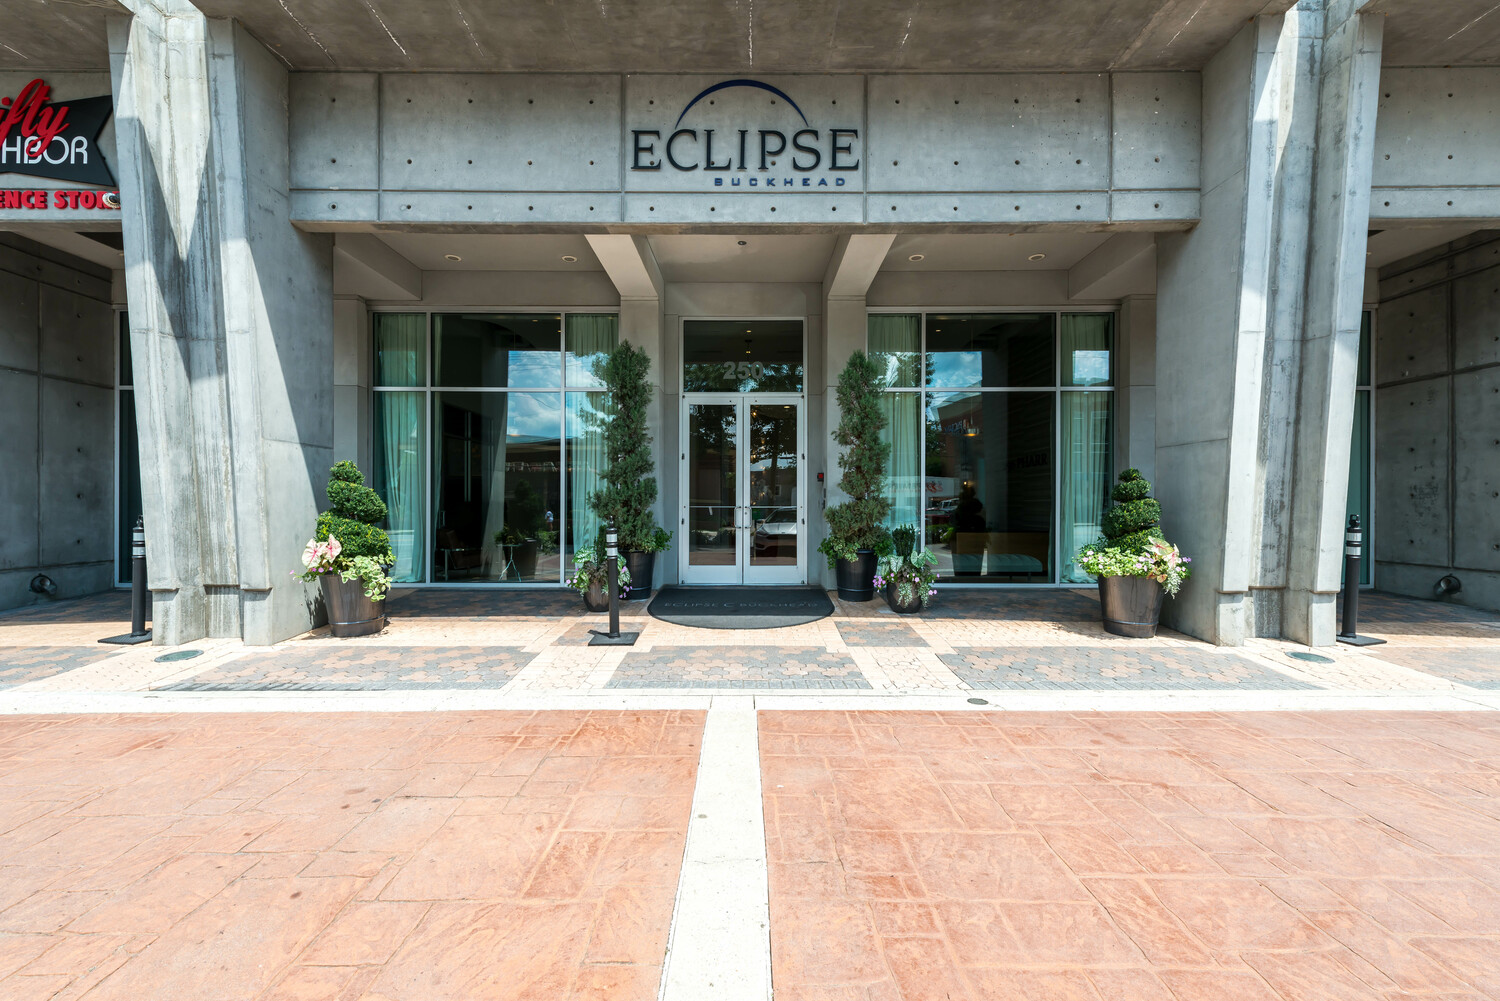 <span style="font-weight: bold;">Eclipse at Buckhead&nbsp; Renovation</span>